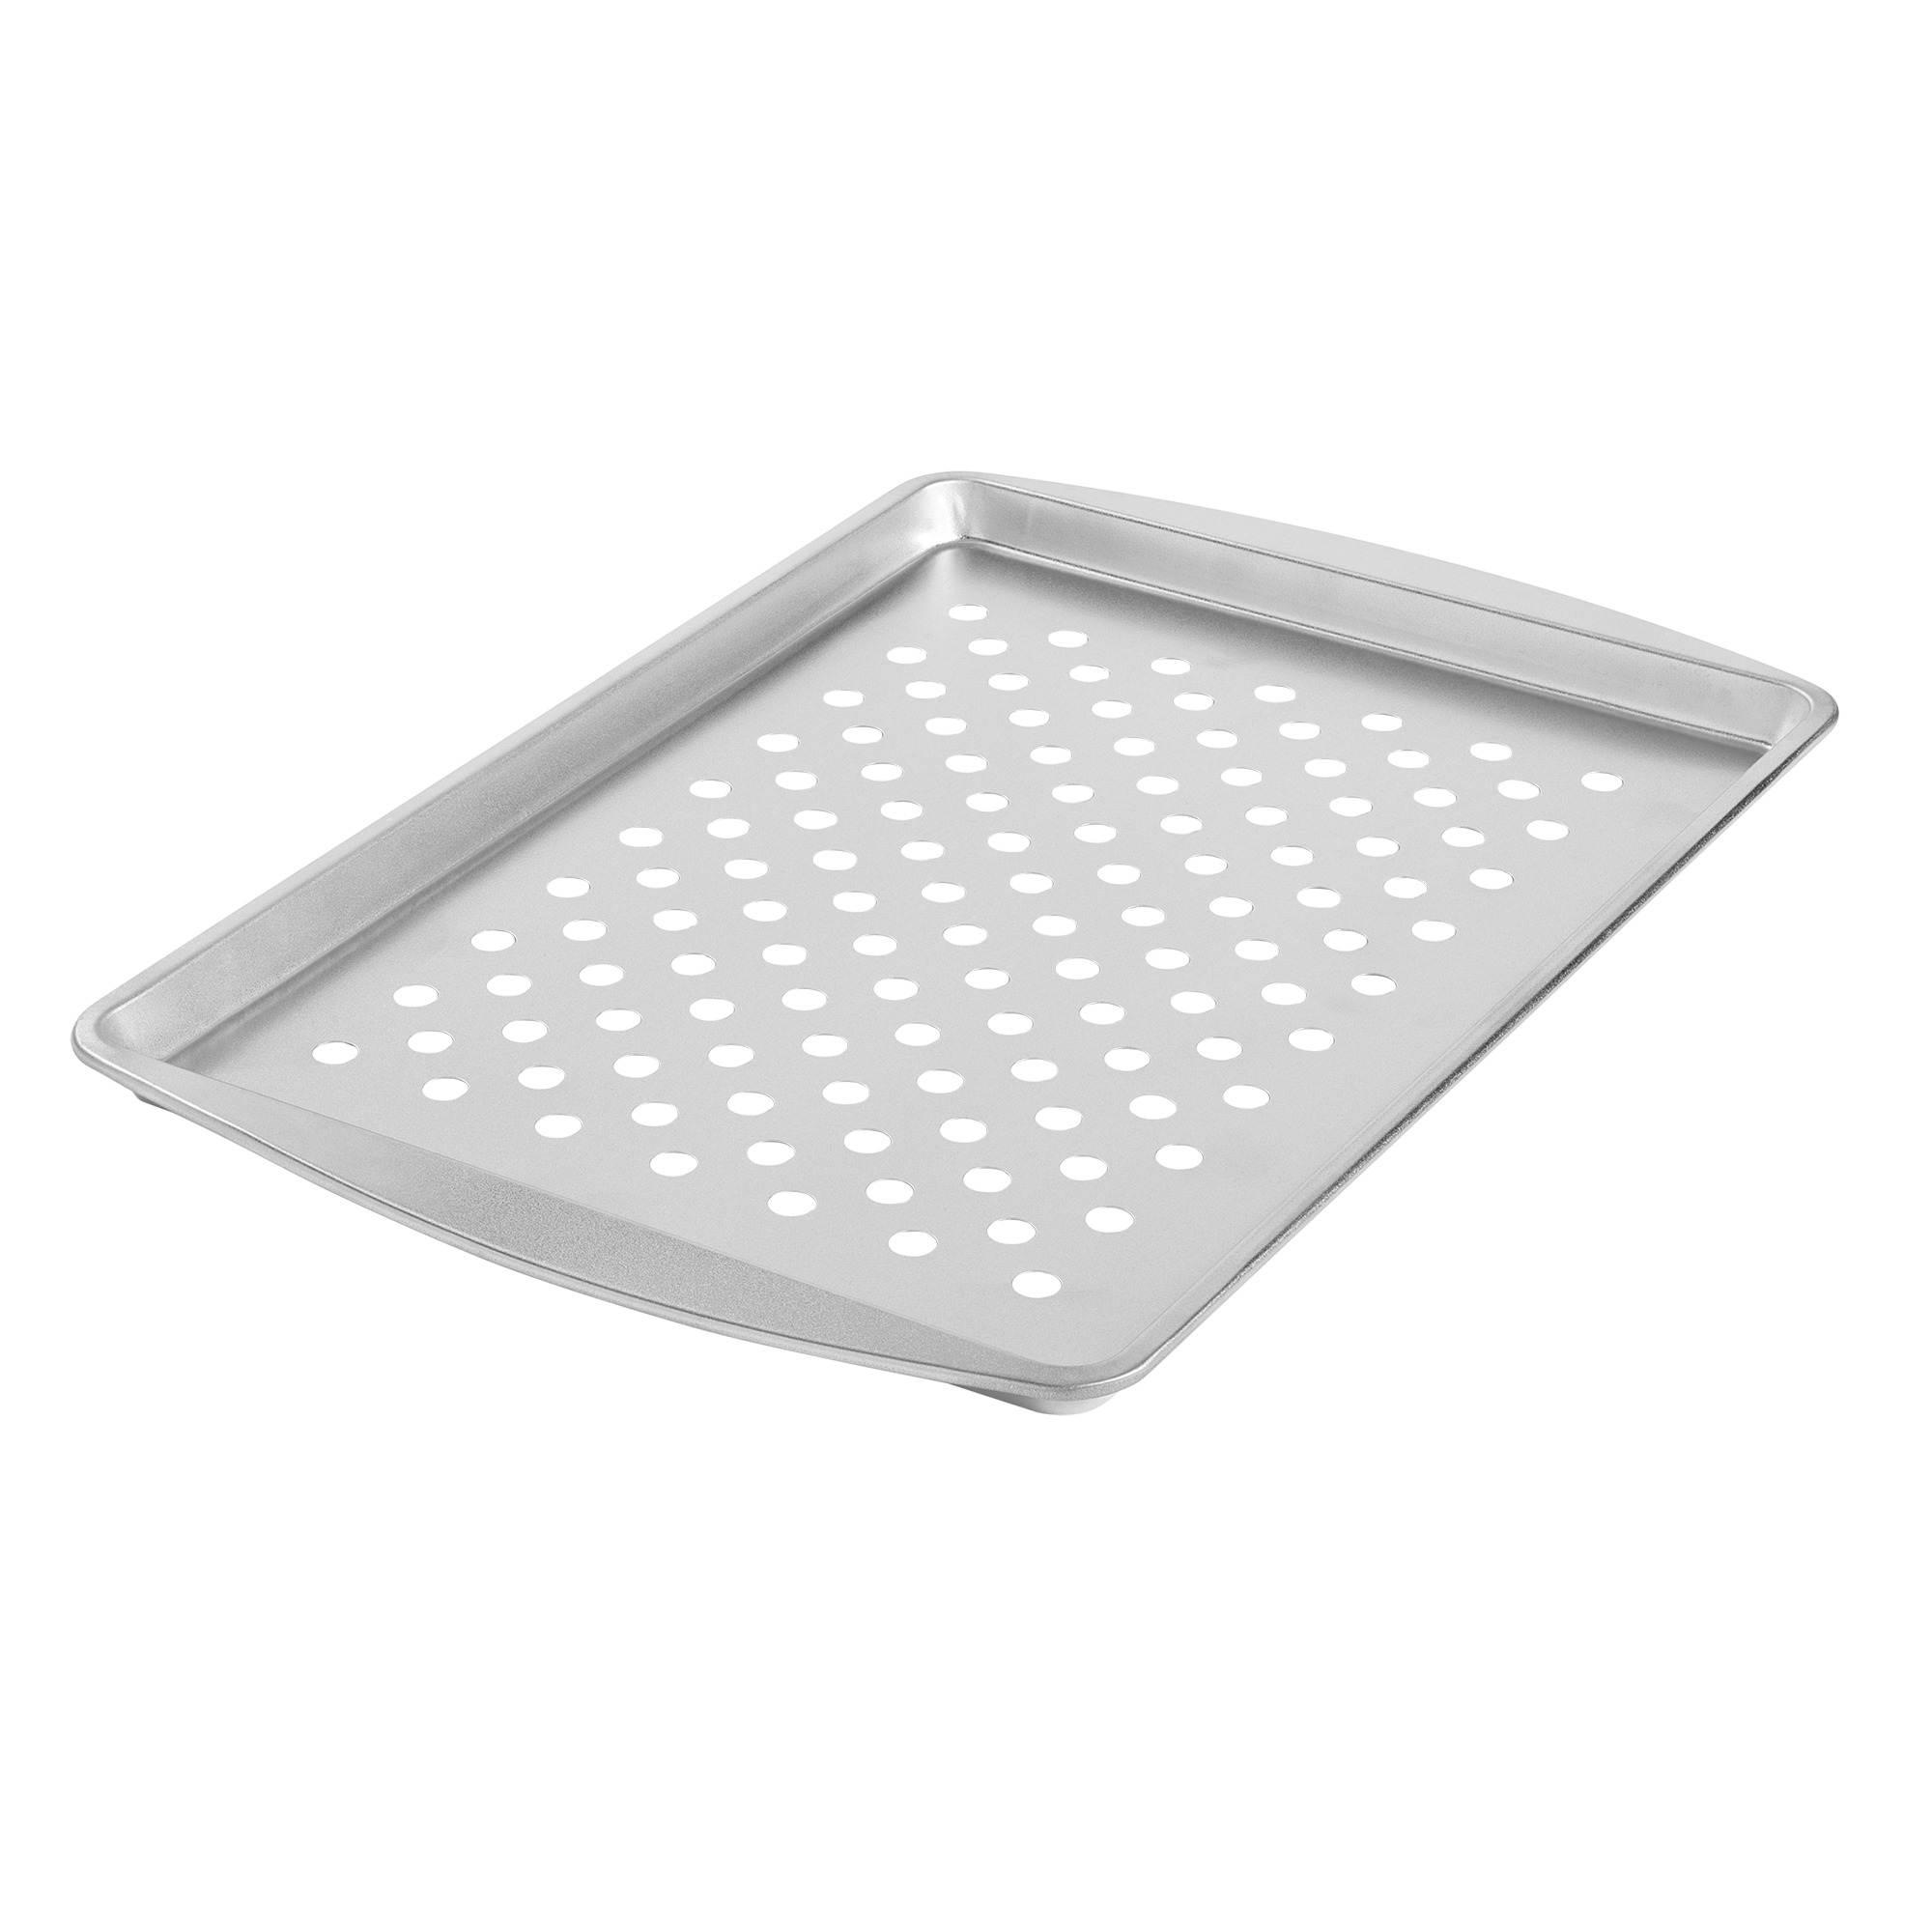 Grill top tray. Perforated surface. Steel construction. Made in USA. For grilling small and tender foods. Brandless. Designed for outdoor grills.